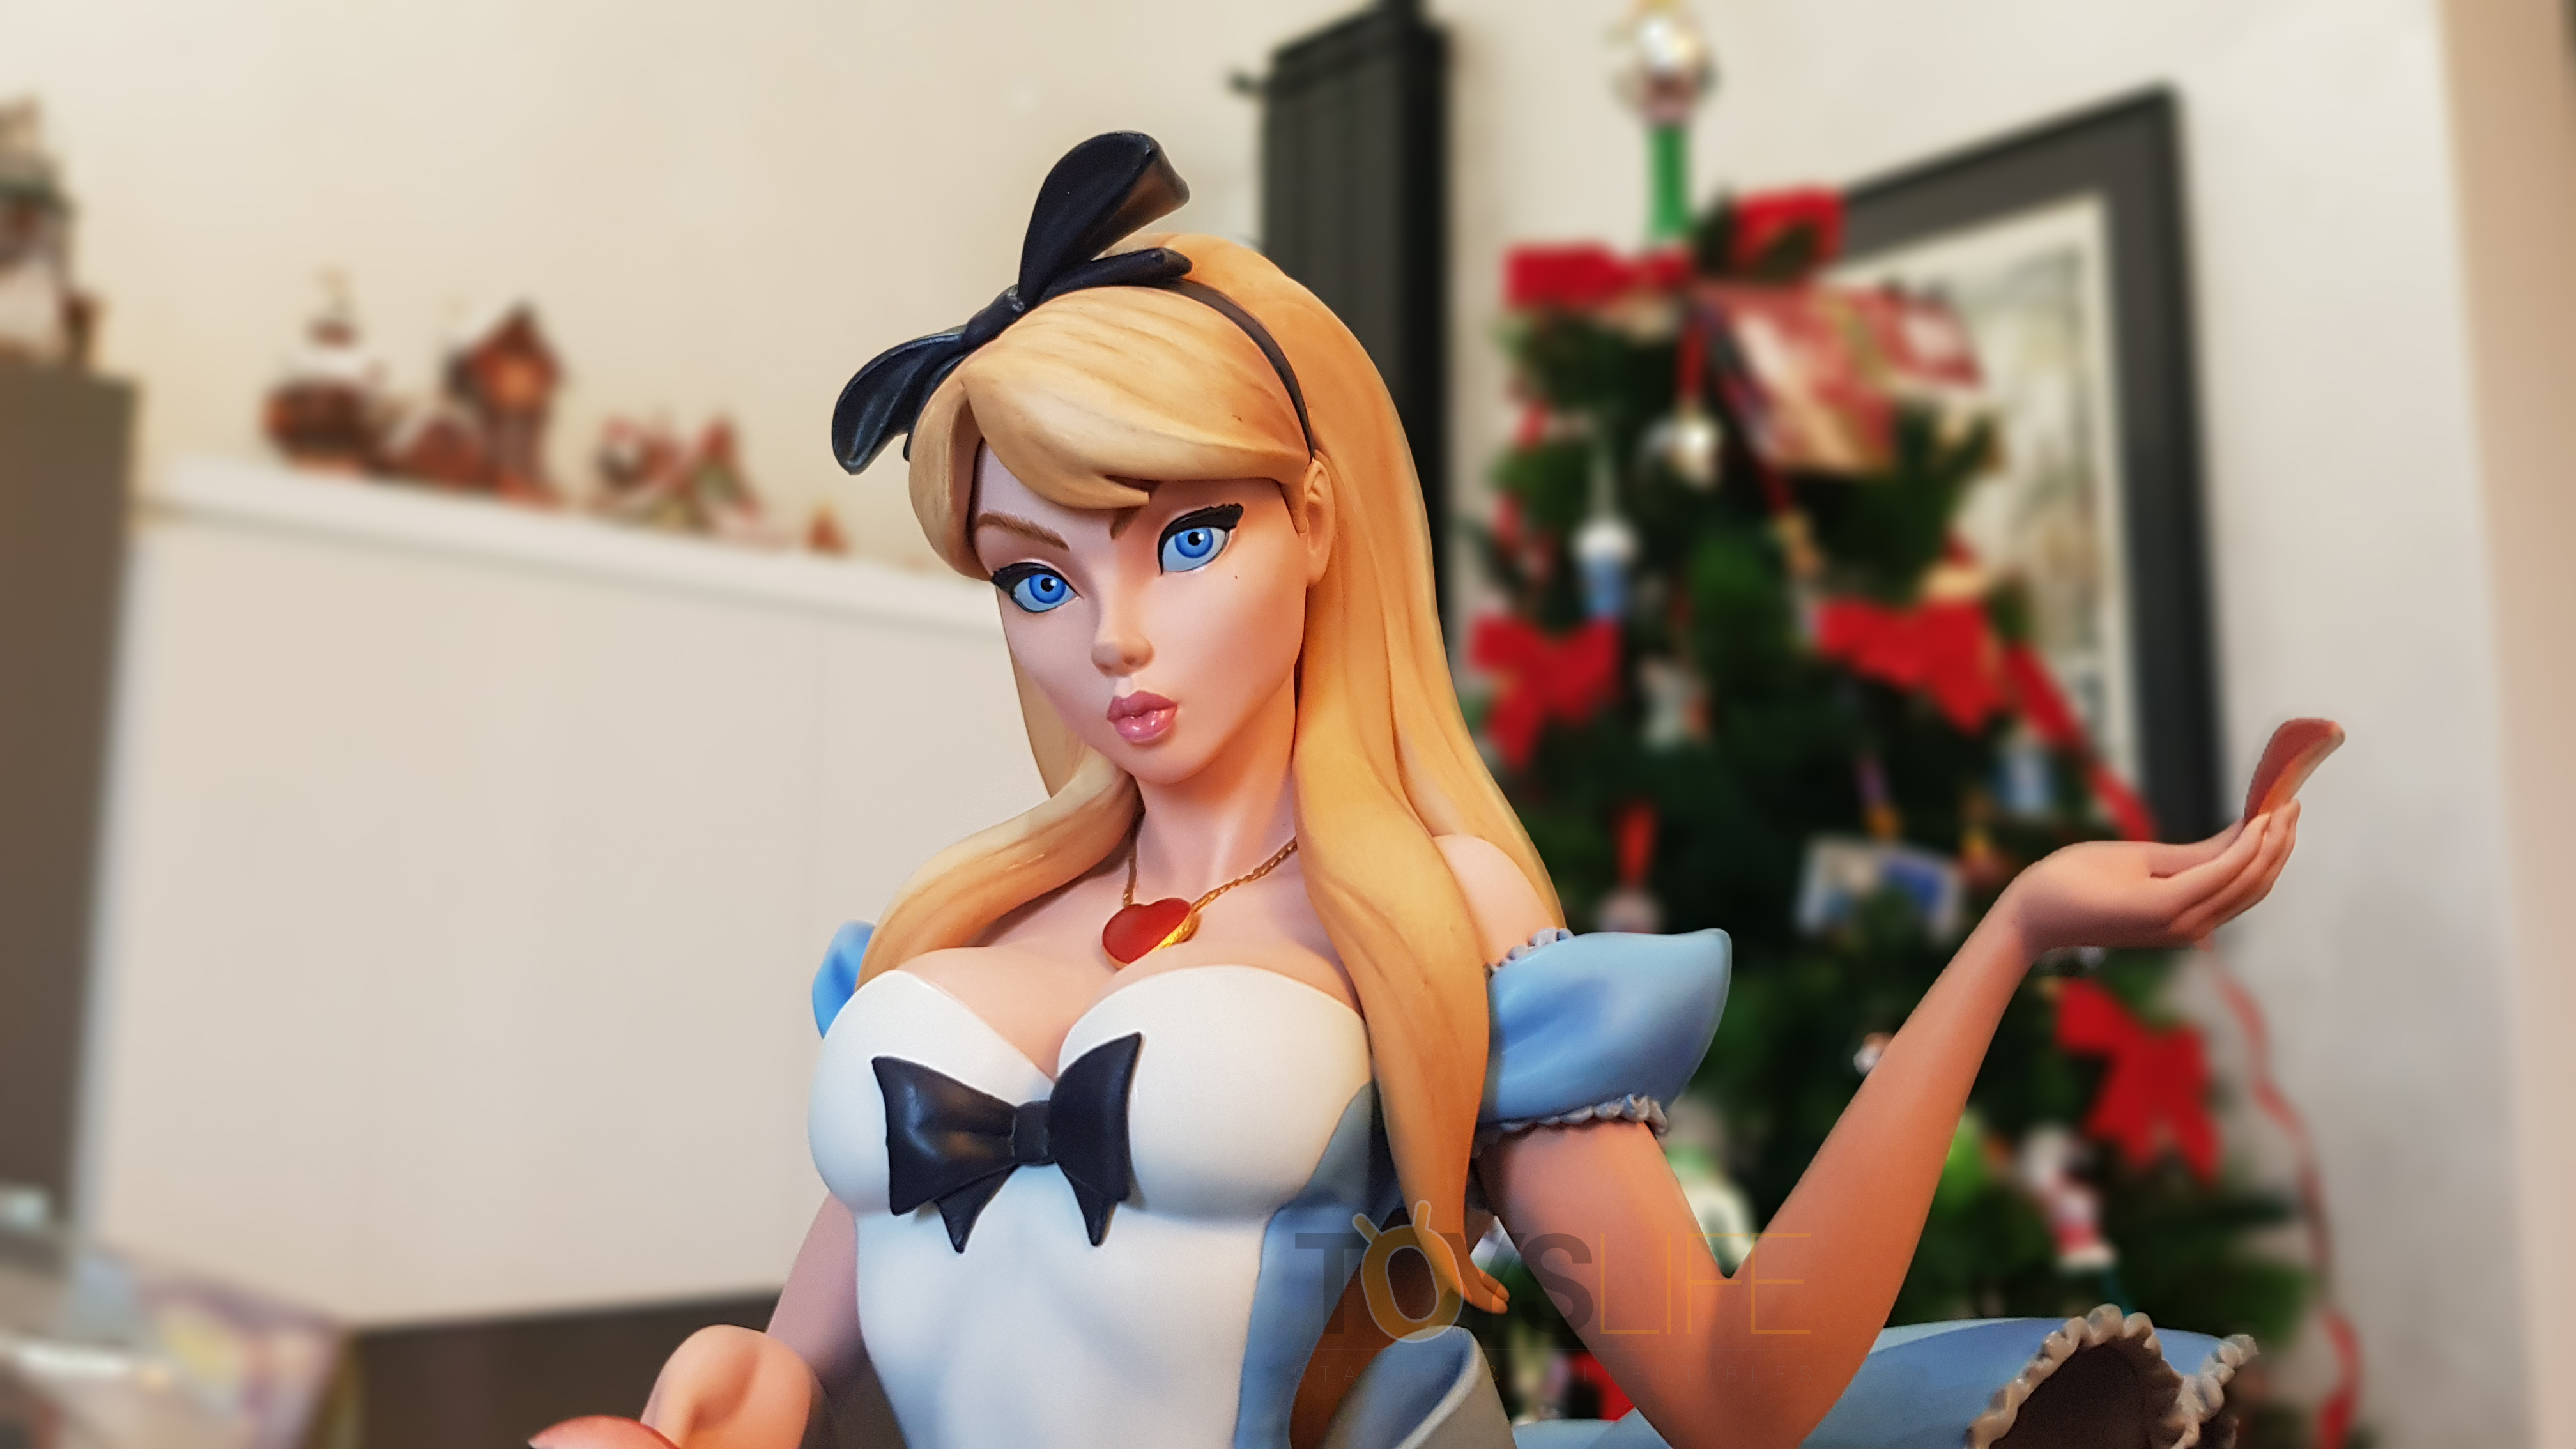 sideshow-fairytale-fantasies-jscampbell-alice-exclusive-statue-toyslife-review-09